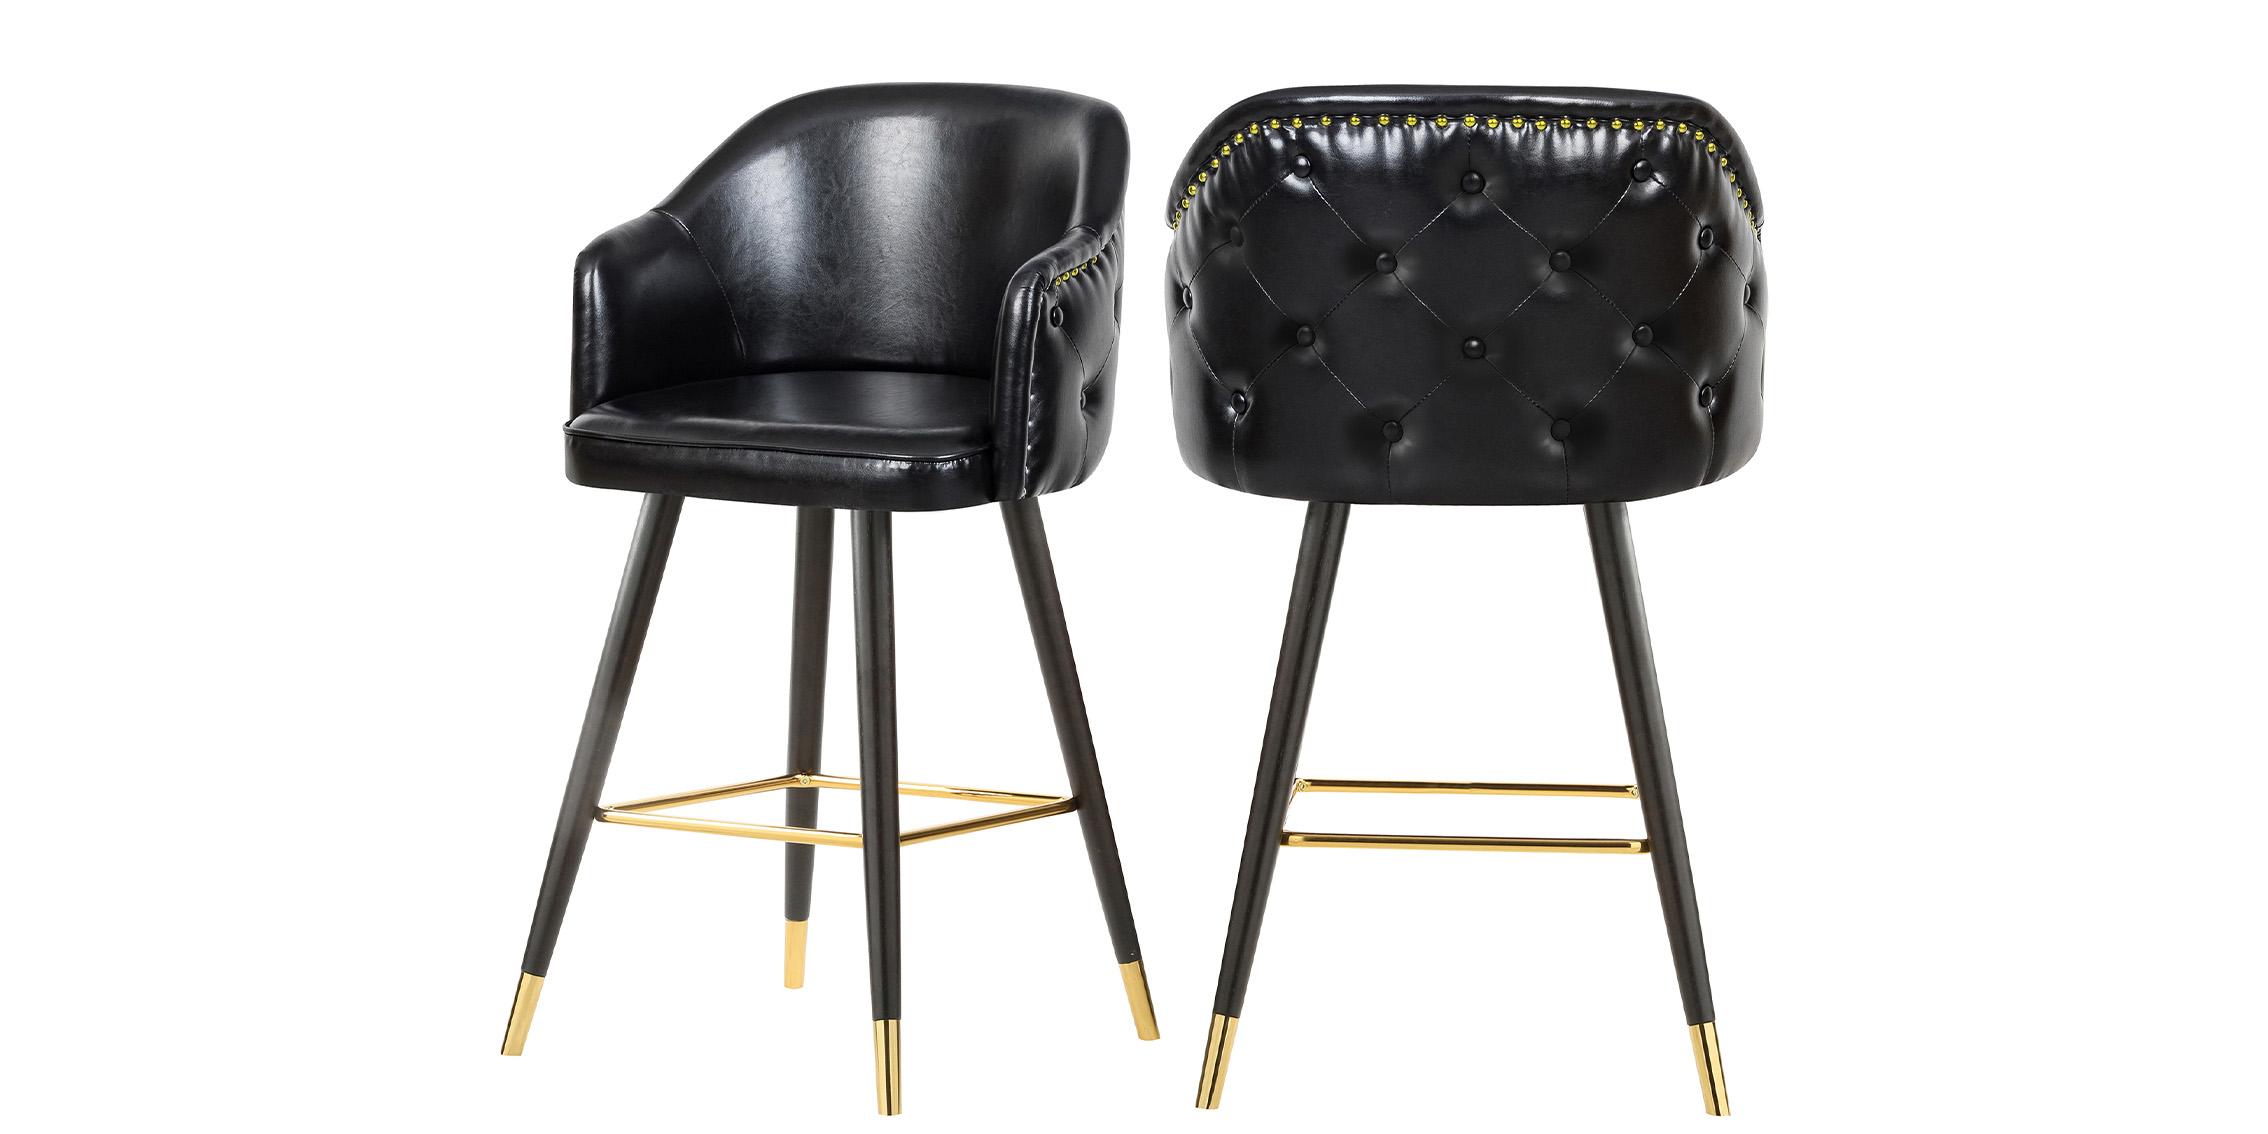 Contemporary, Modern Counter Stool Set BARBOSA 900Black-C 900Black-C in Black Faux Leather